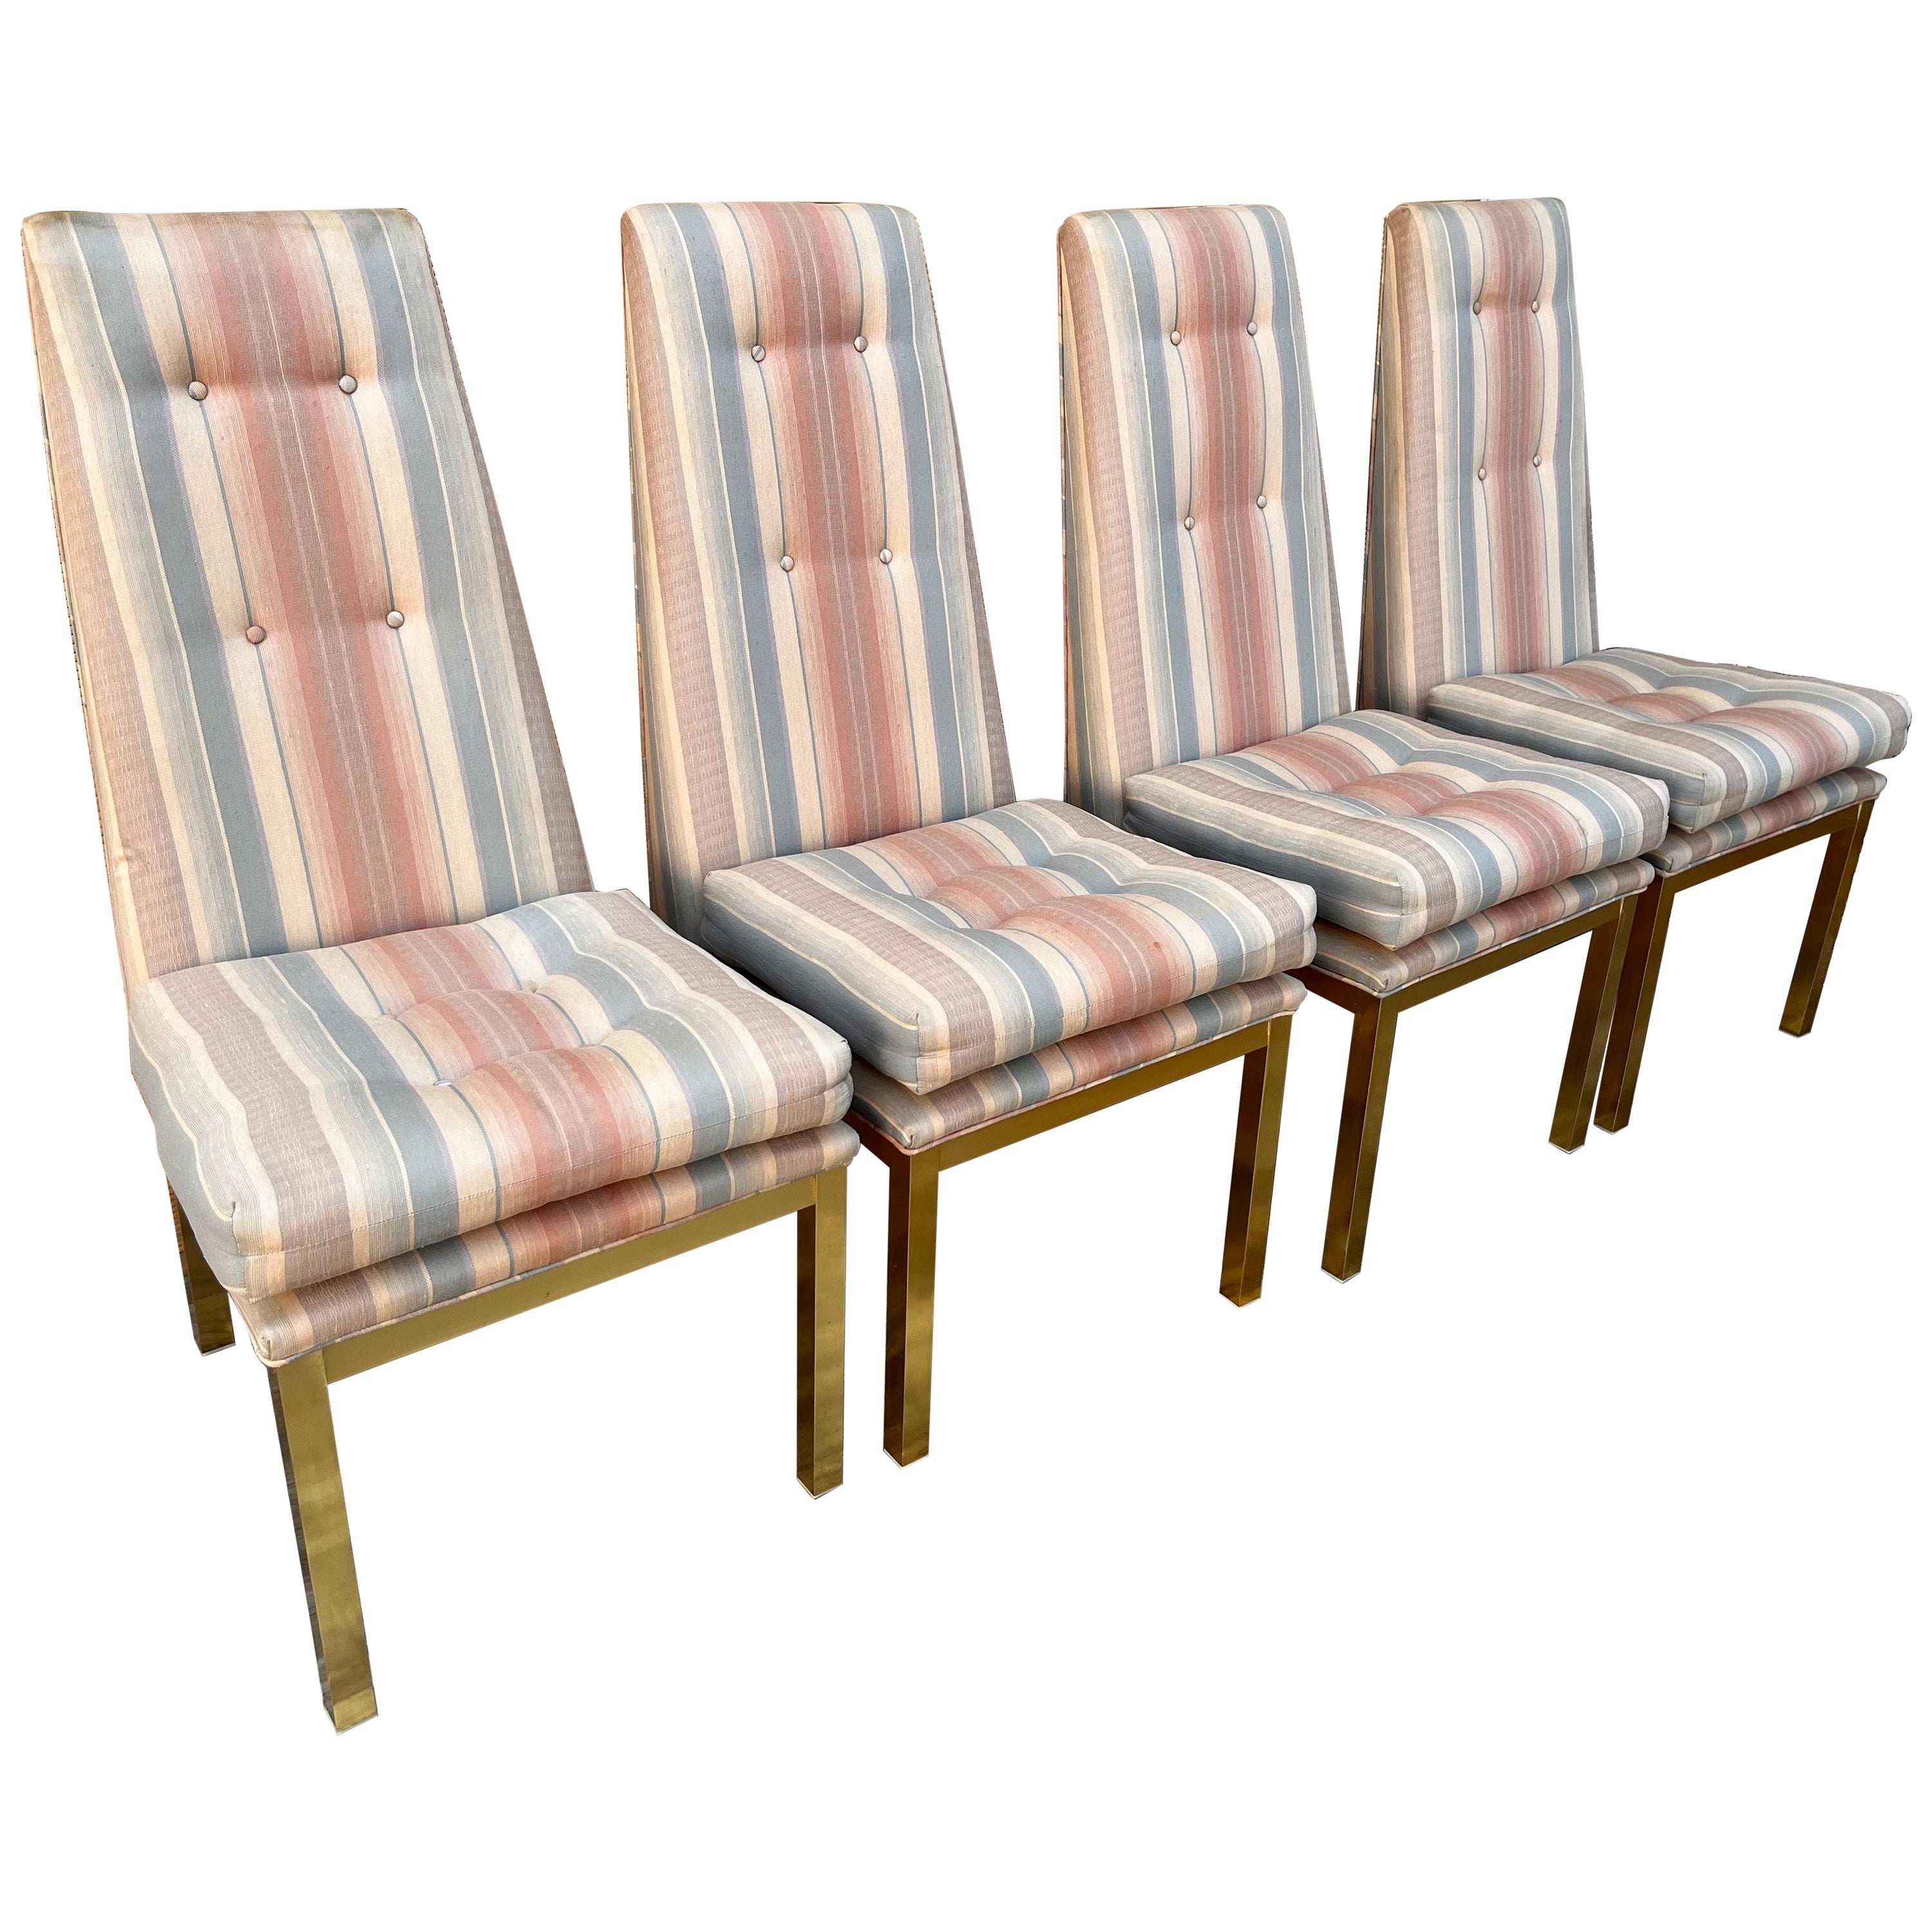 Set of Four 1960s Mid-Century Modern Dining Chairs in the Adrain Pearsall Style For Sale